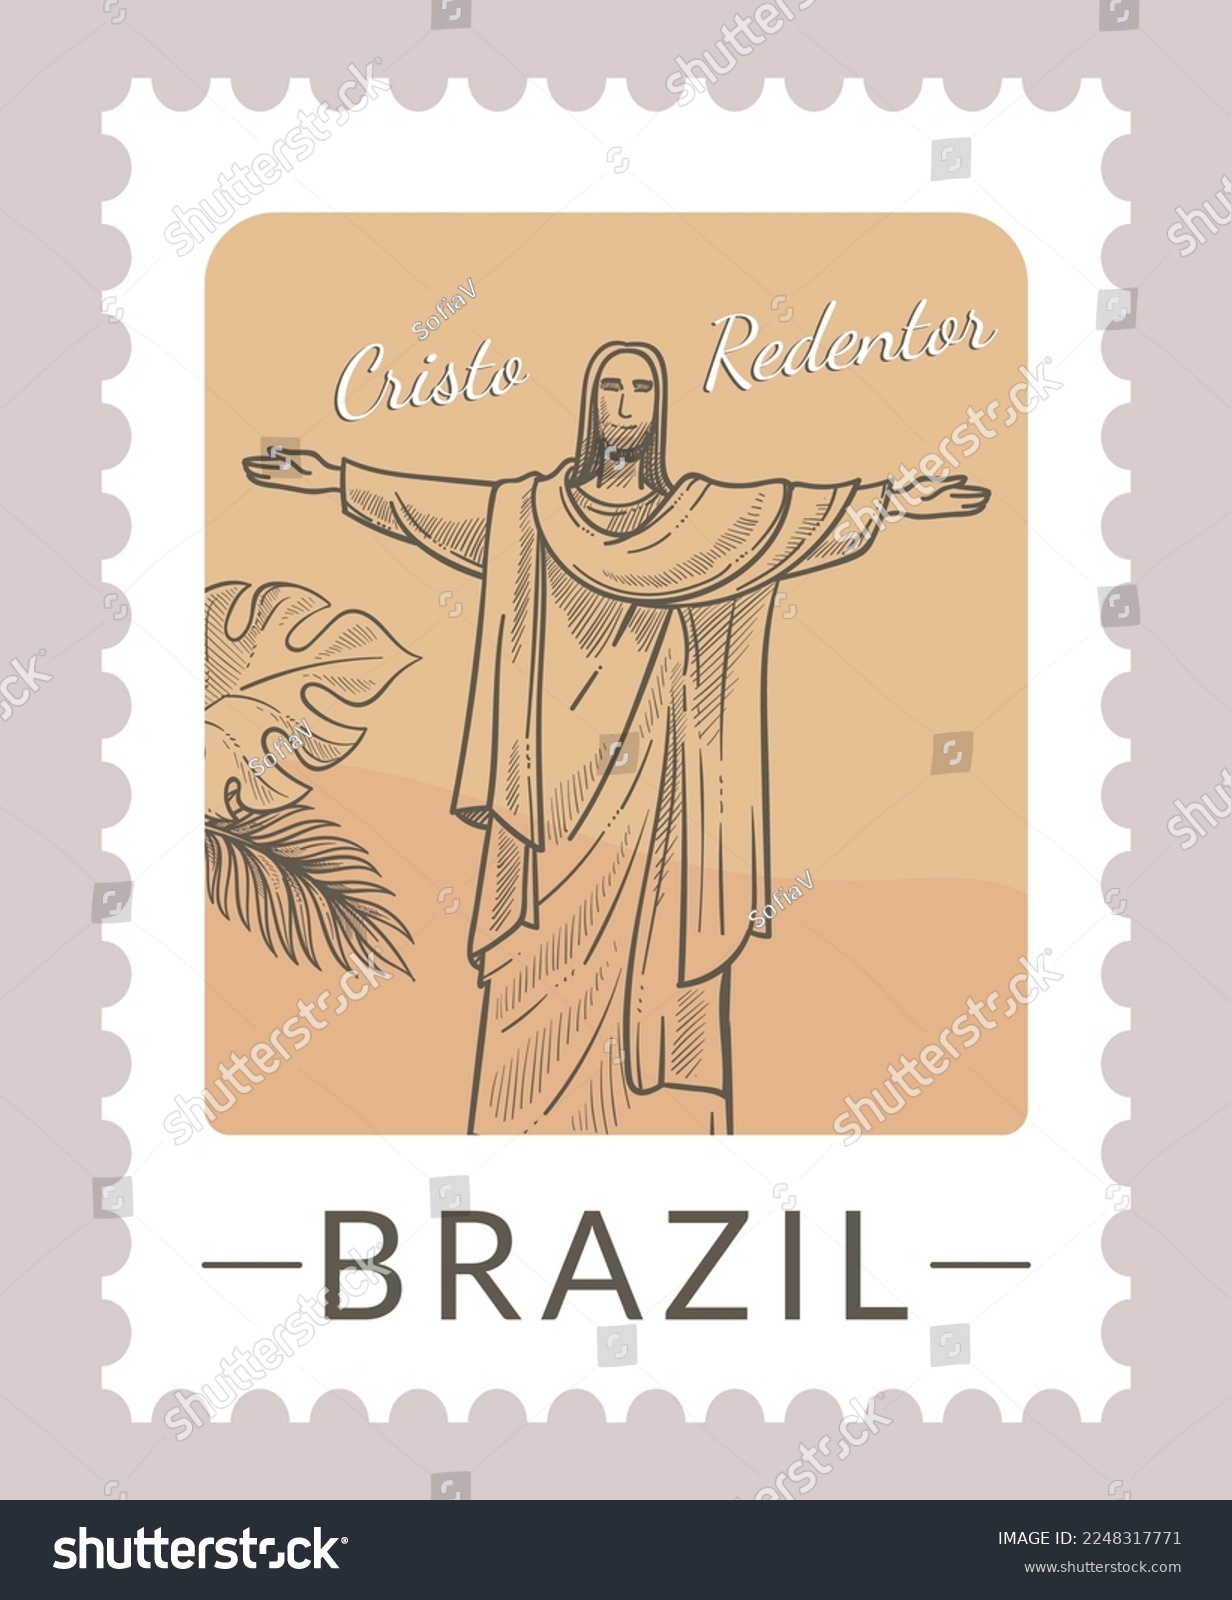 SVG of Postcard or postmark with statue of jesus christ. Cristo redentor cultural heritage of Brazil. Postal mark or card, mailing letter and correspondence. Monochrome sketch outline. Vector in flat style svg